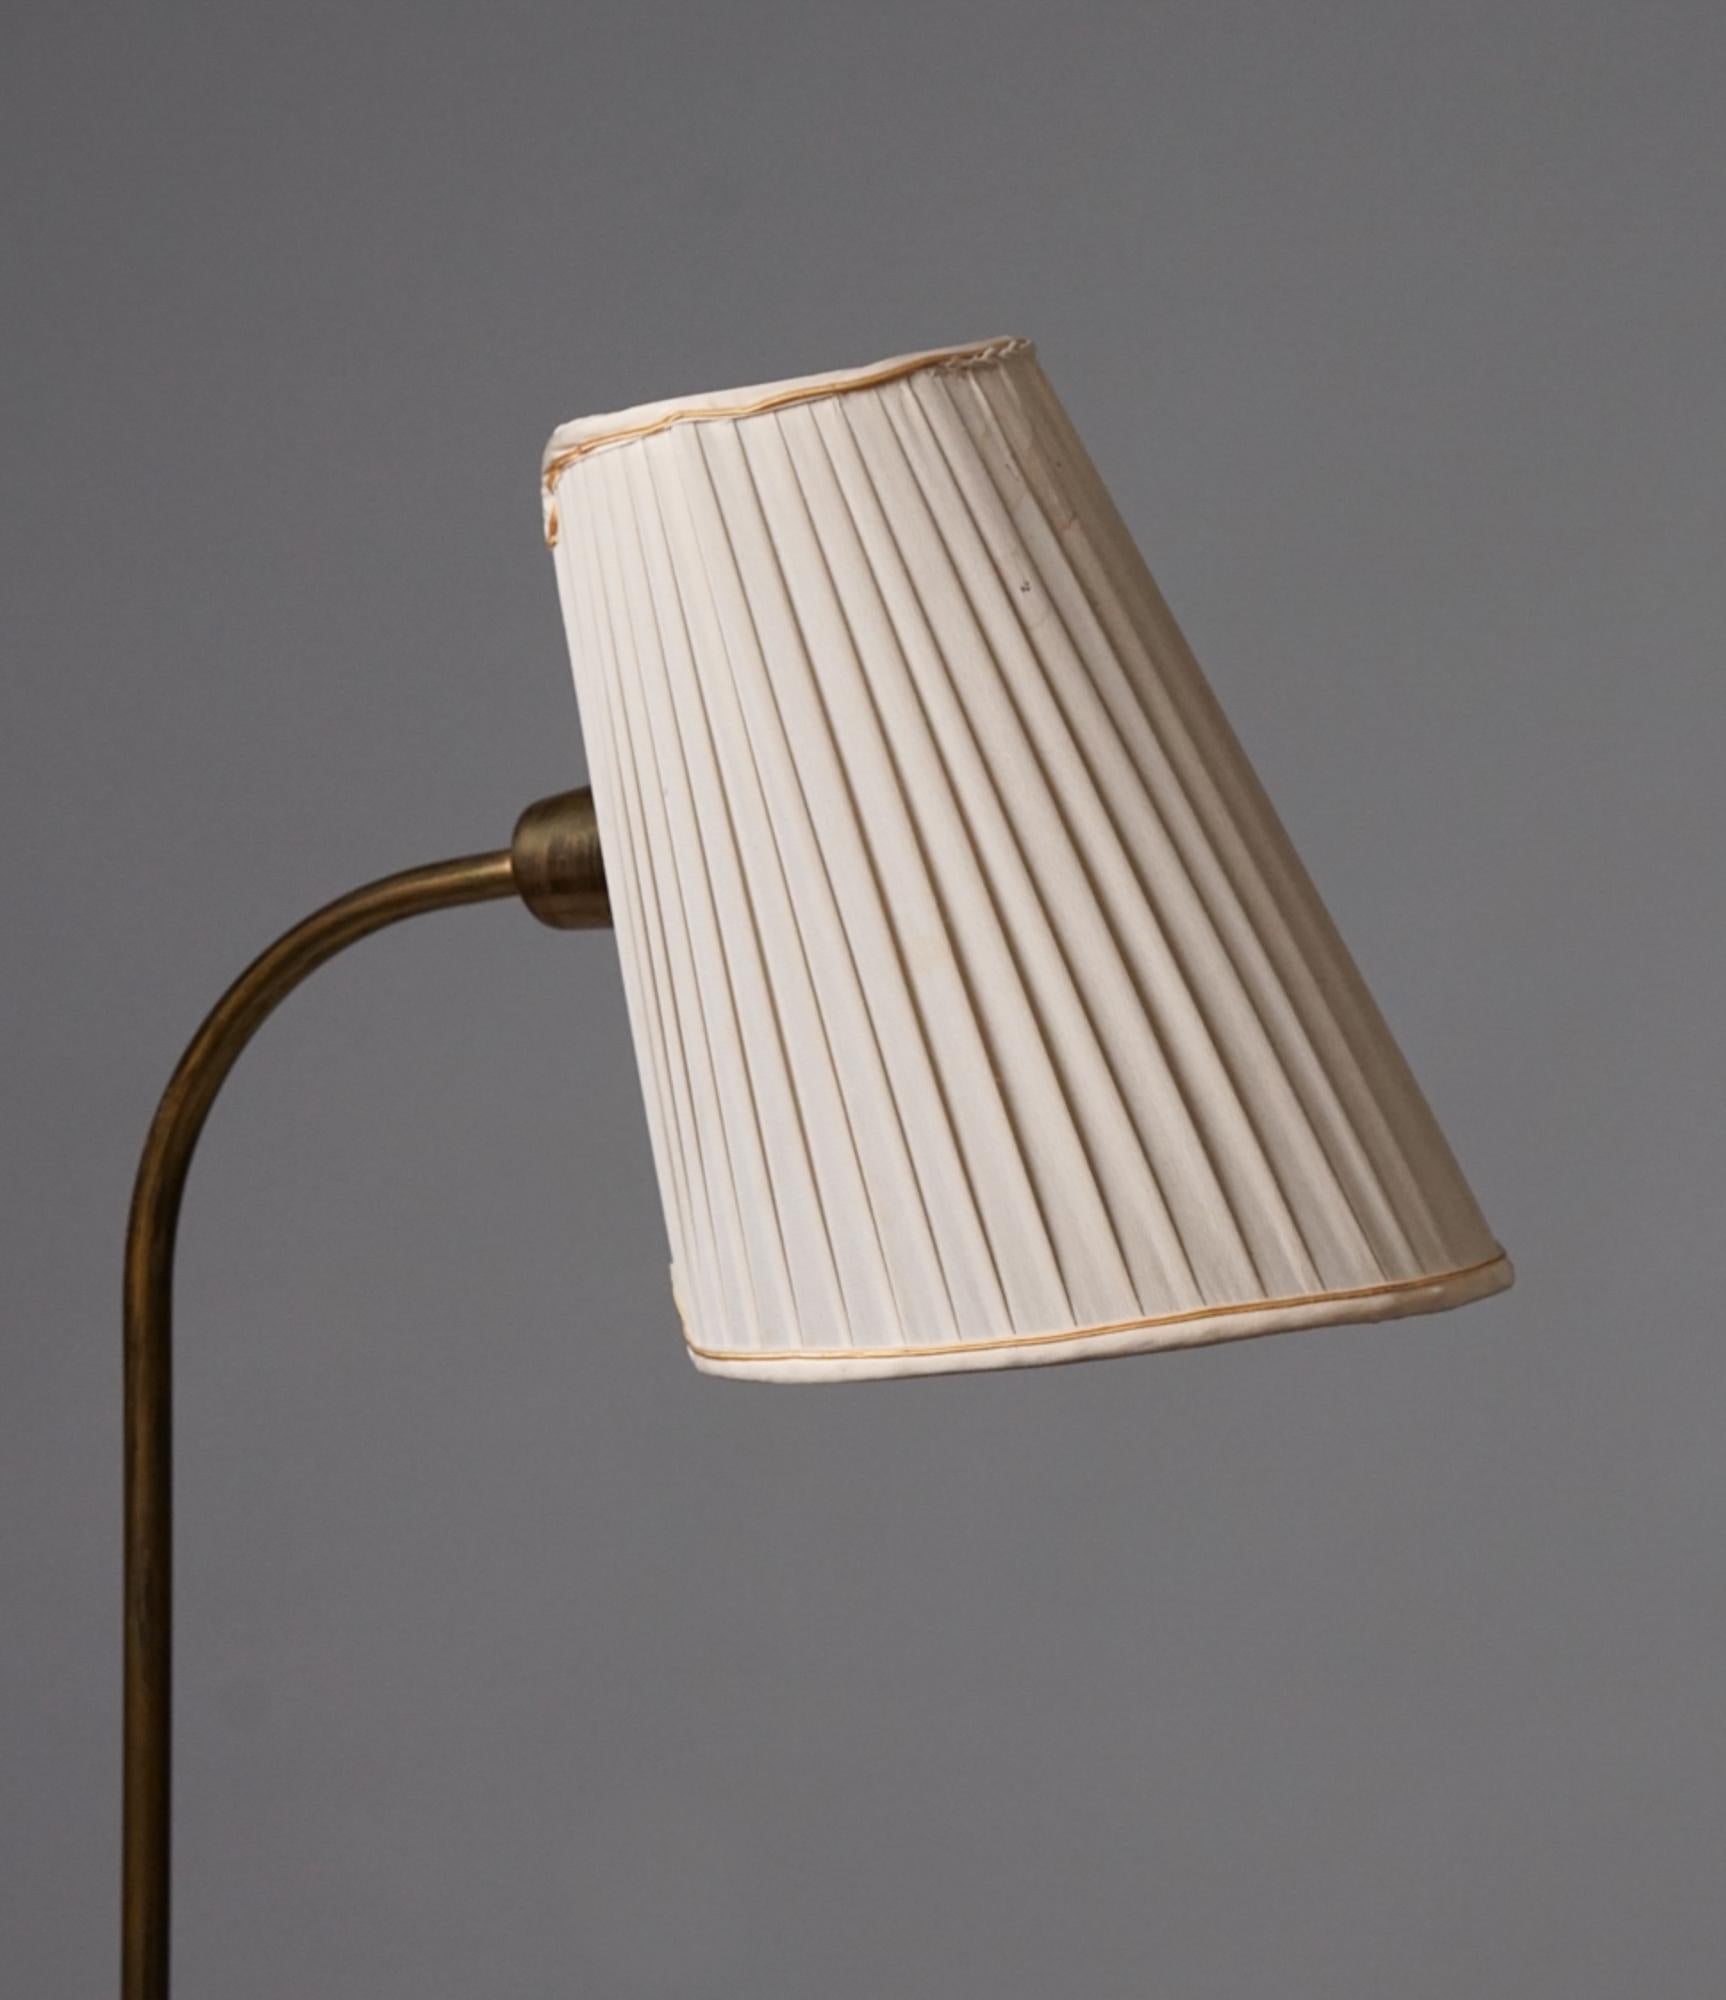 Scandinavian Modern floor lamp, manufactured by Stockmann/Orno Oy, 1950s. Brass with silk lampshade. Good vintage condition, minor patina consistent with age and use. Beautiful minimalistic design. 